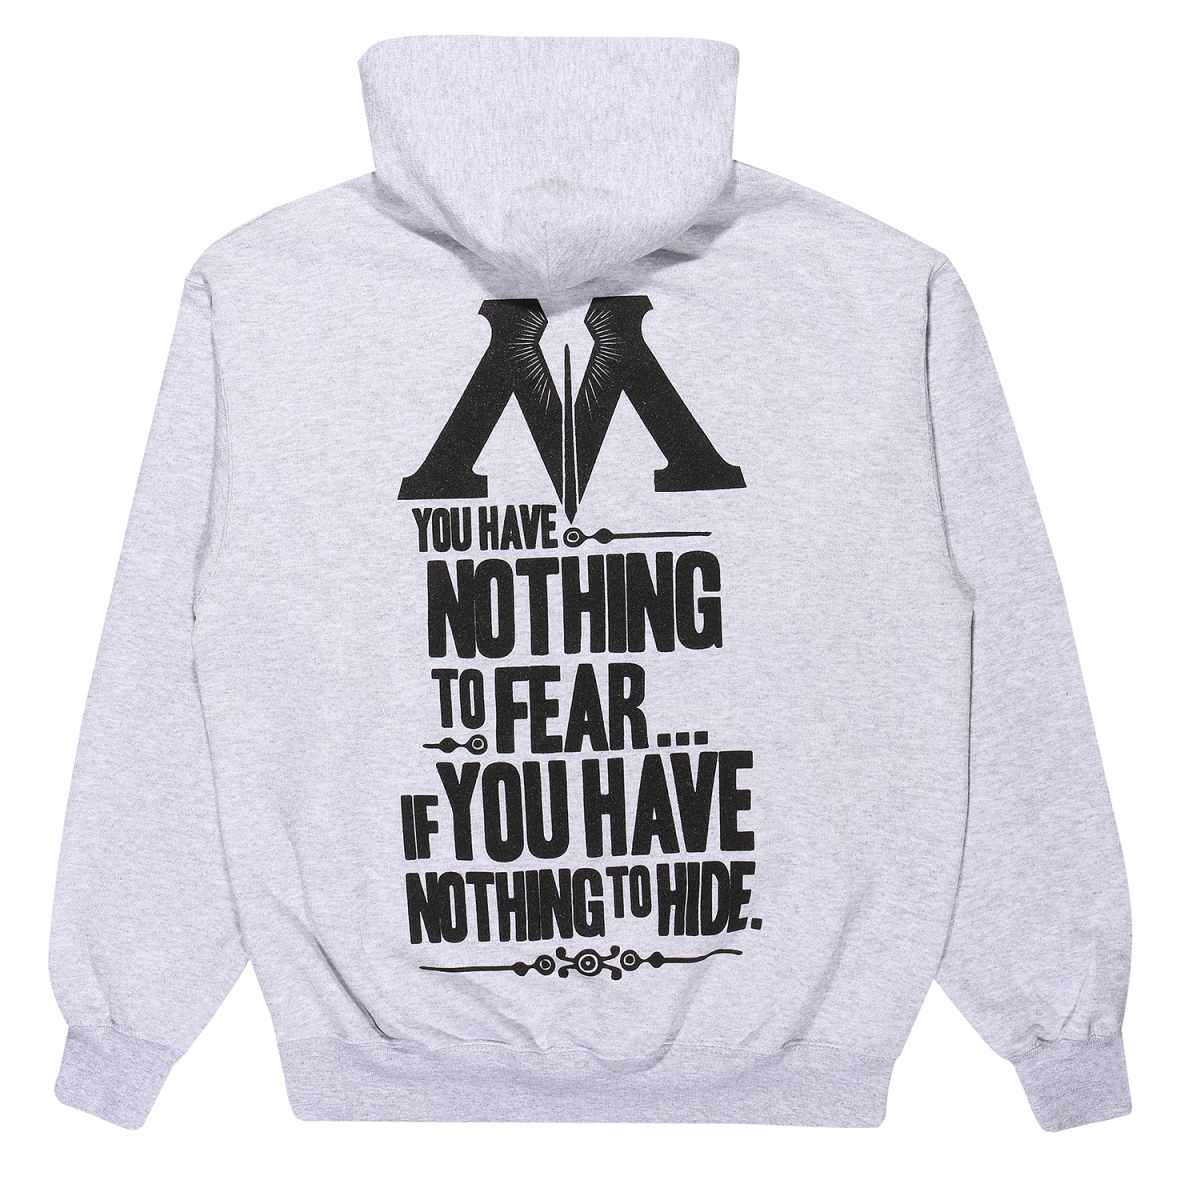 HARRY POTTER - Nothing To Fear Pullover Hoodie